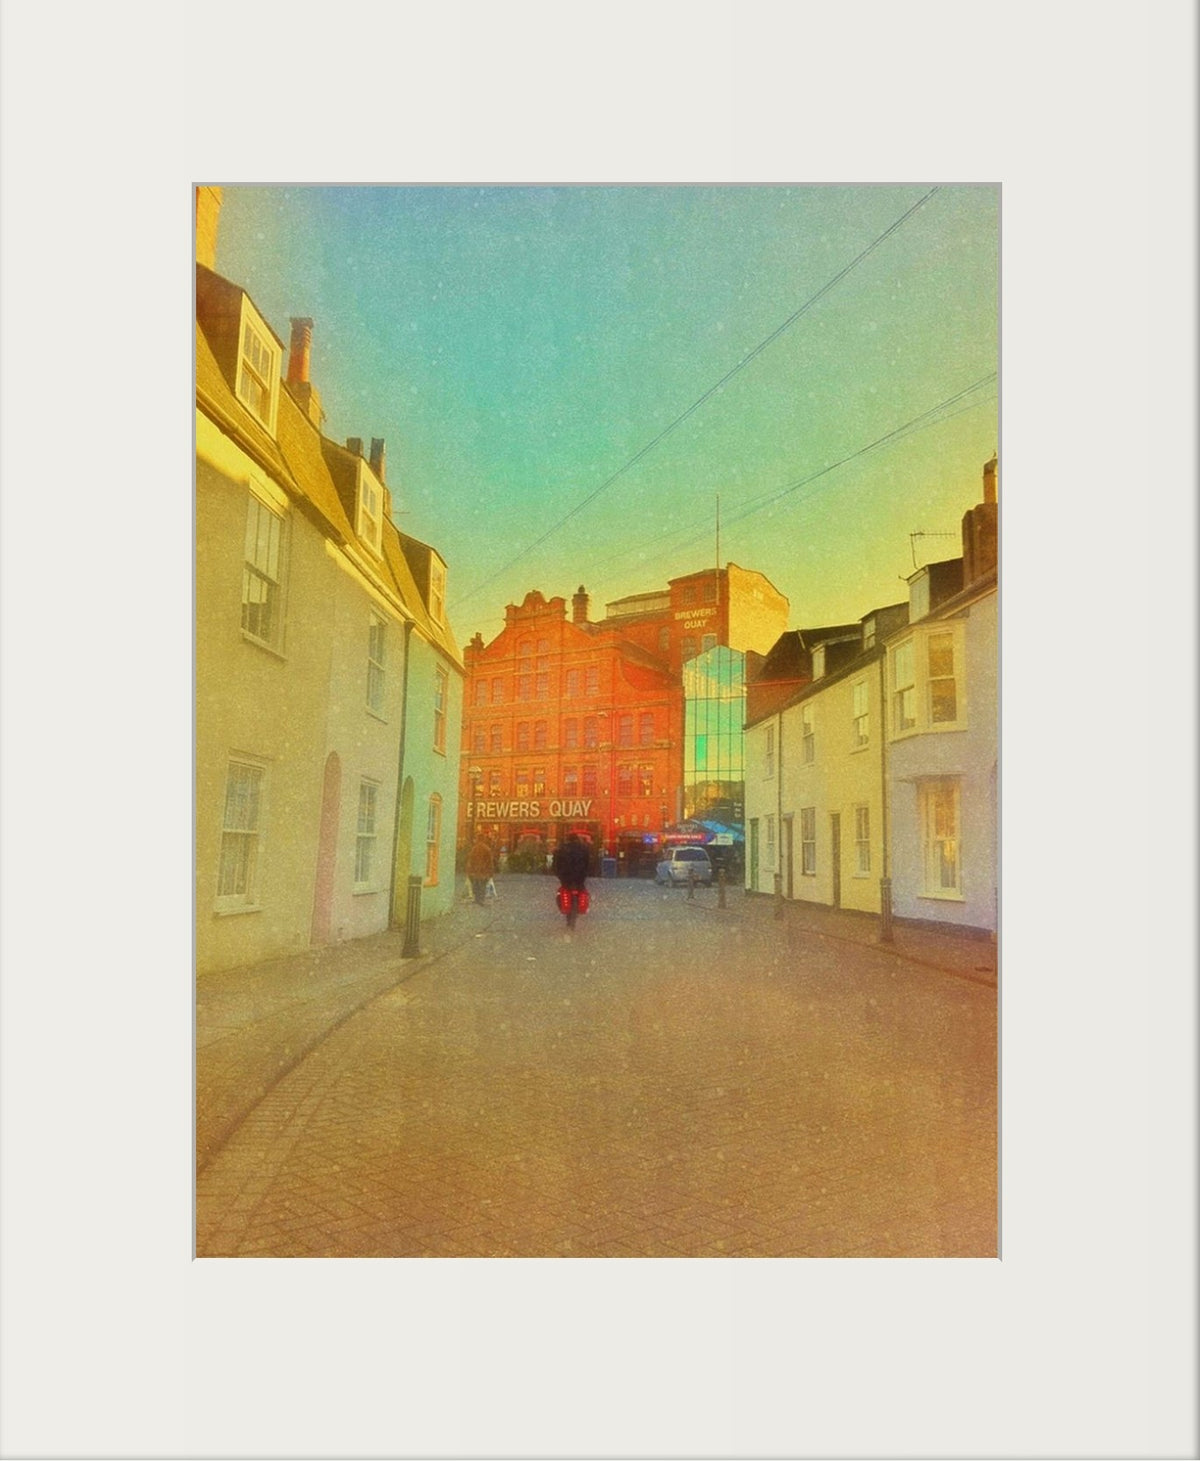 Cove Street, Weymouth (Limited Edition Print)